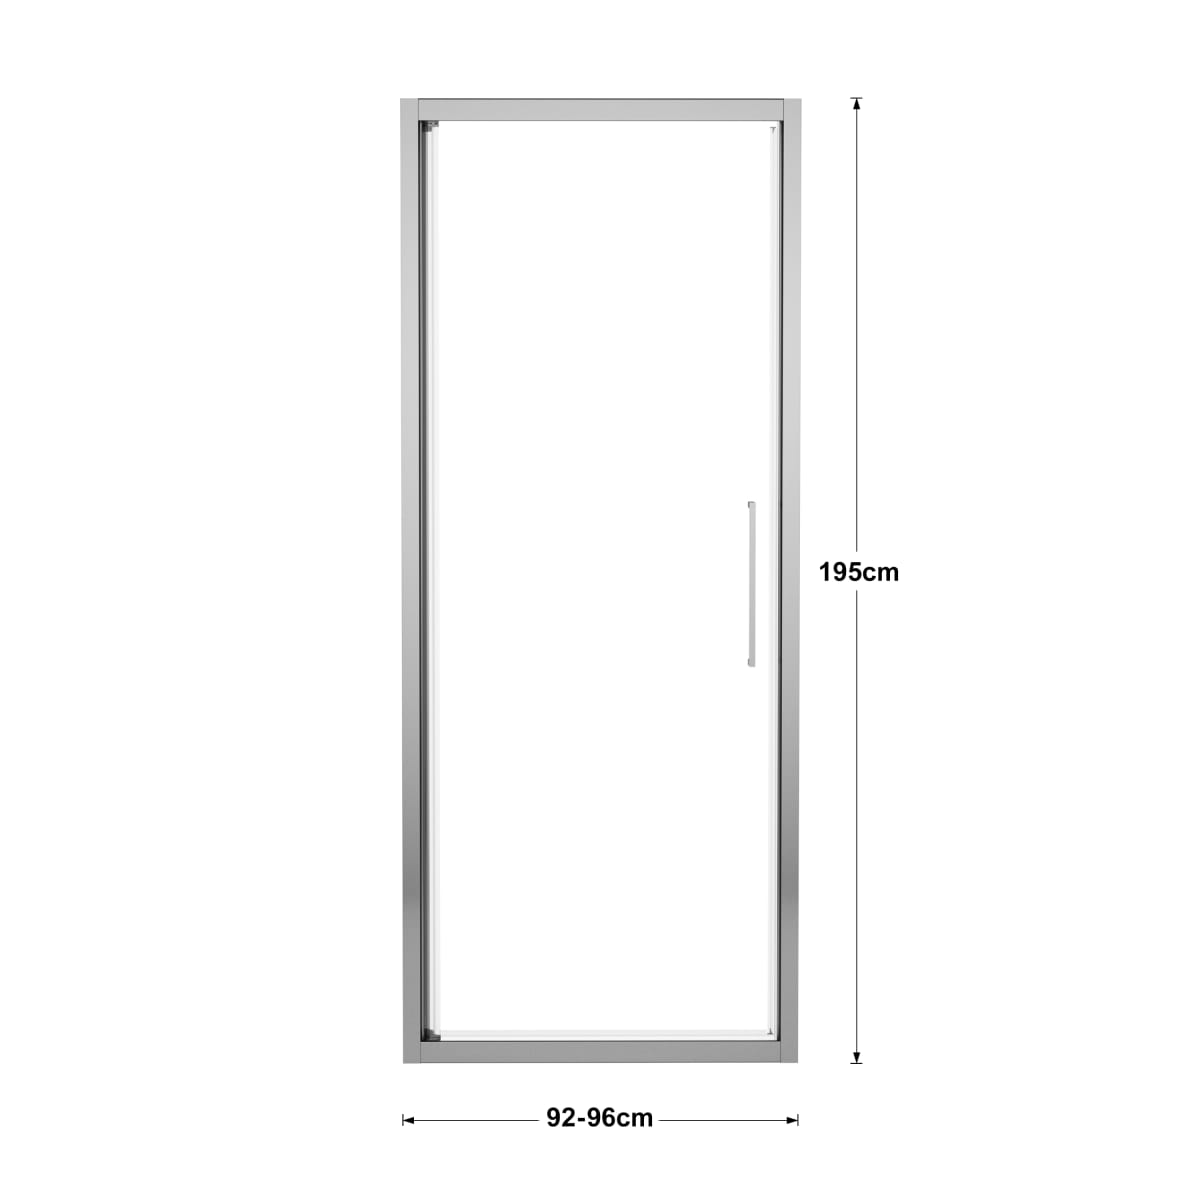 RECORD SWING DOOR L 92-96 H 195 CM CLEAR GLASS 6 MM CHROME